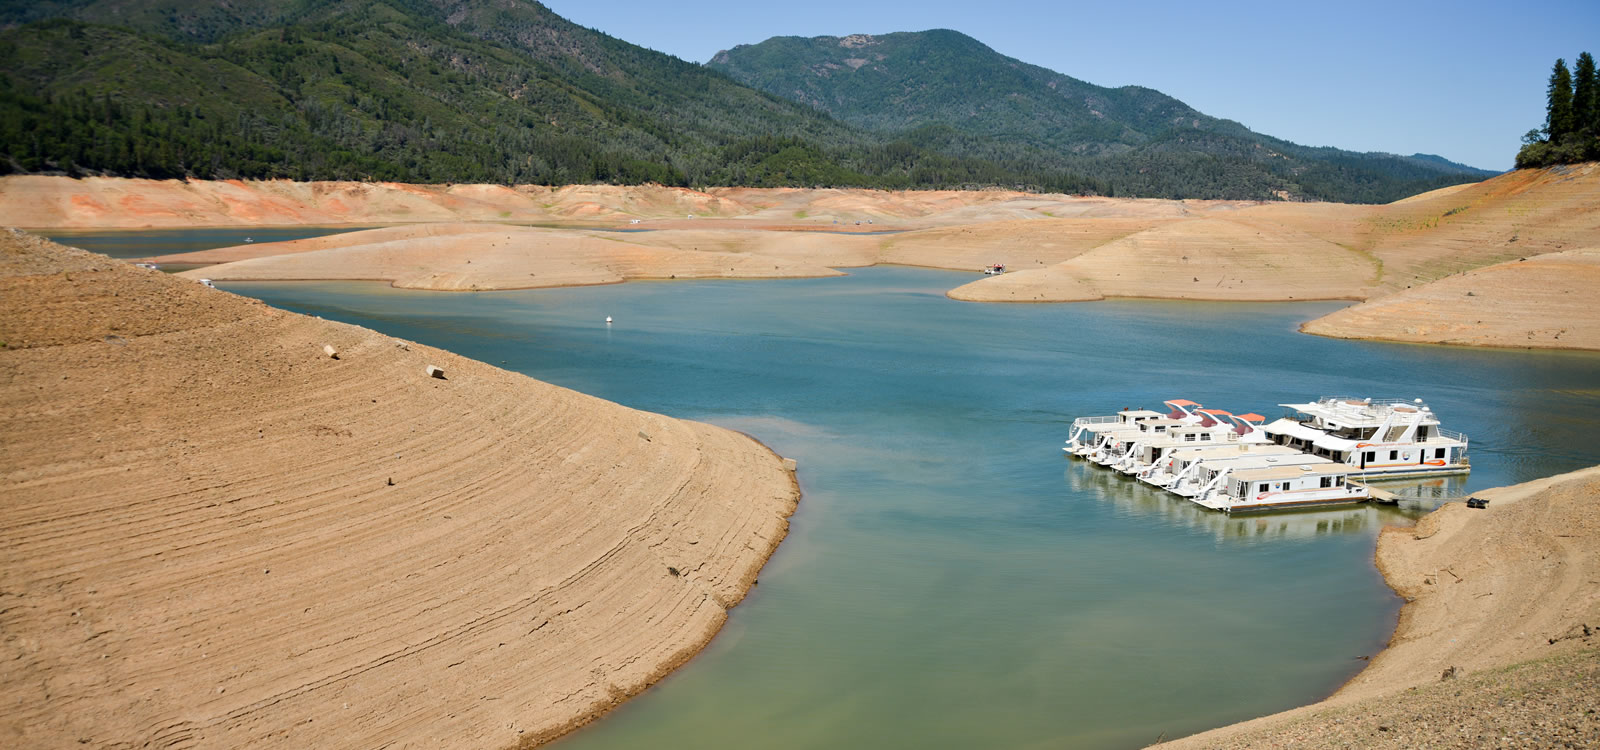 Image of lake shasta with historic low levels.